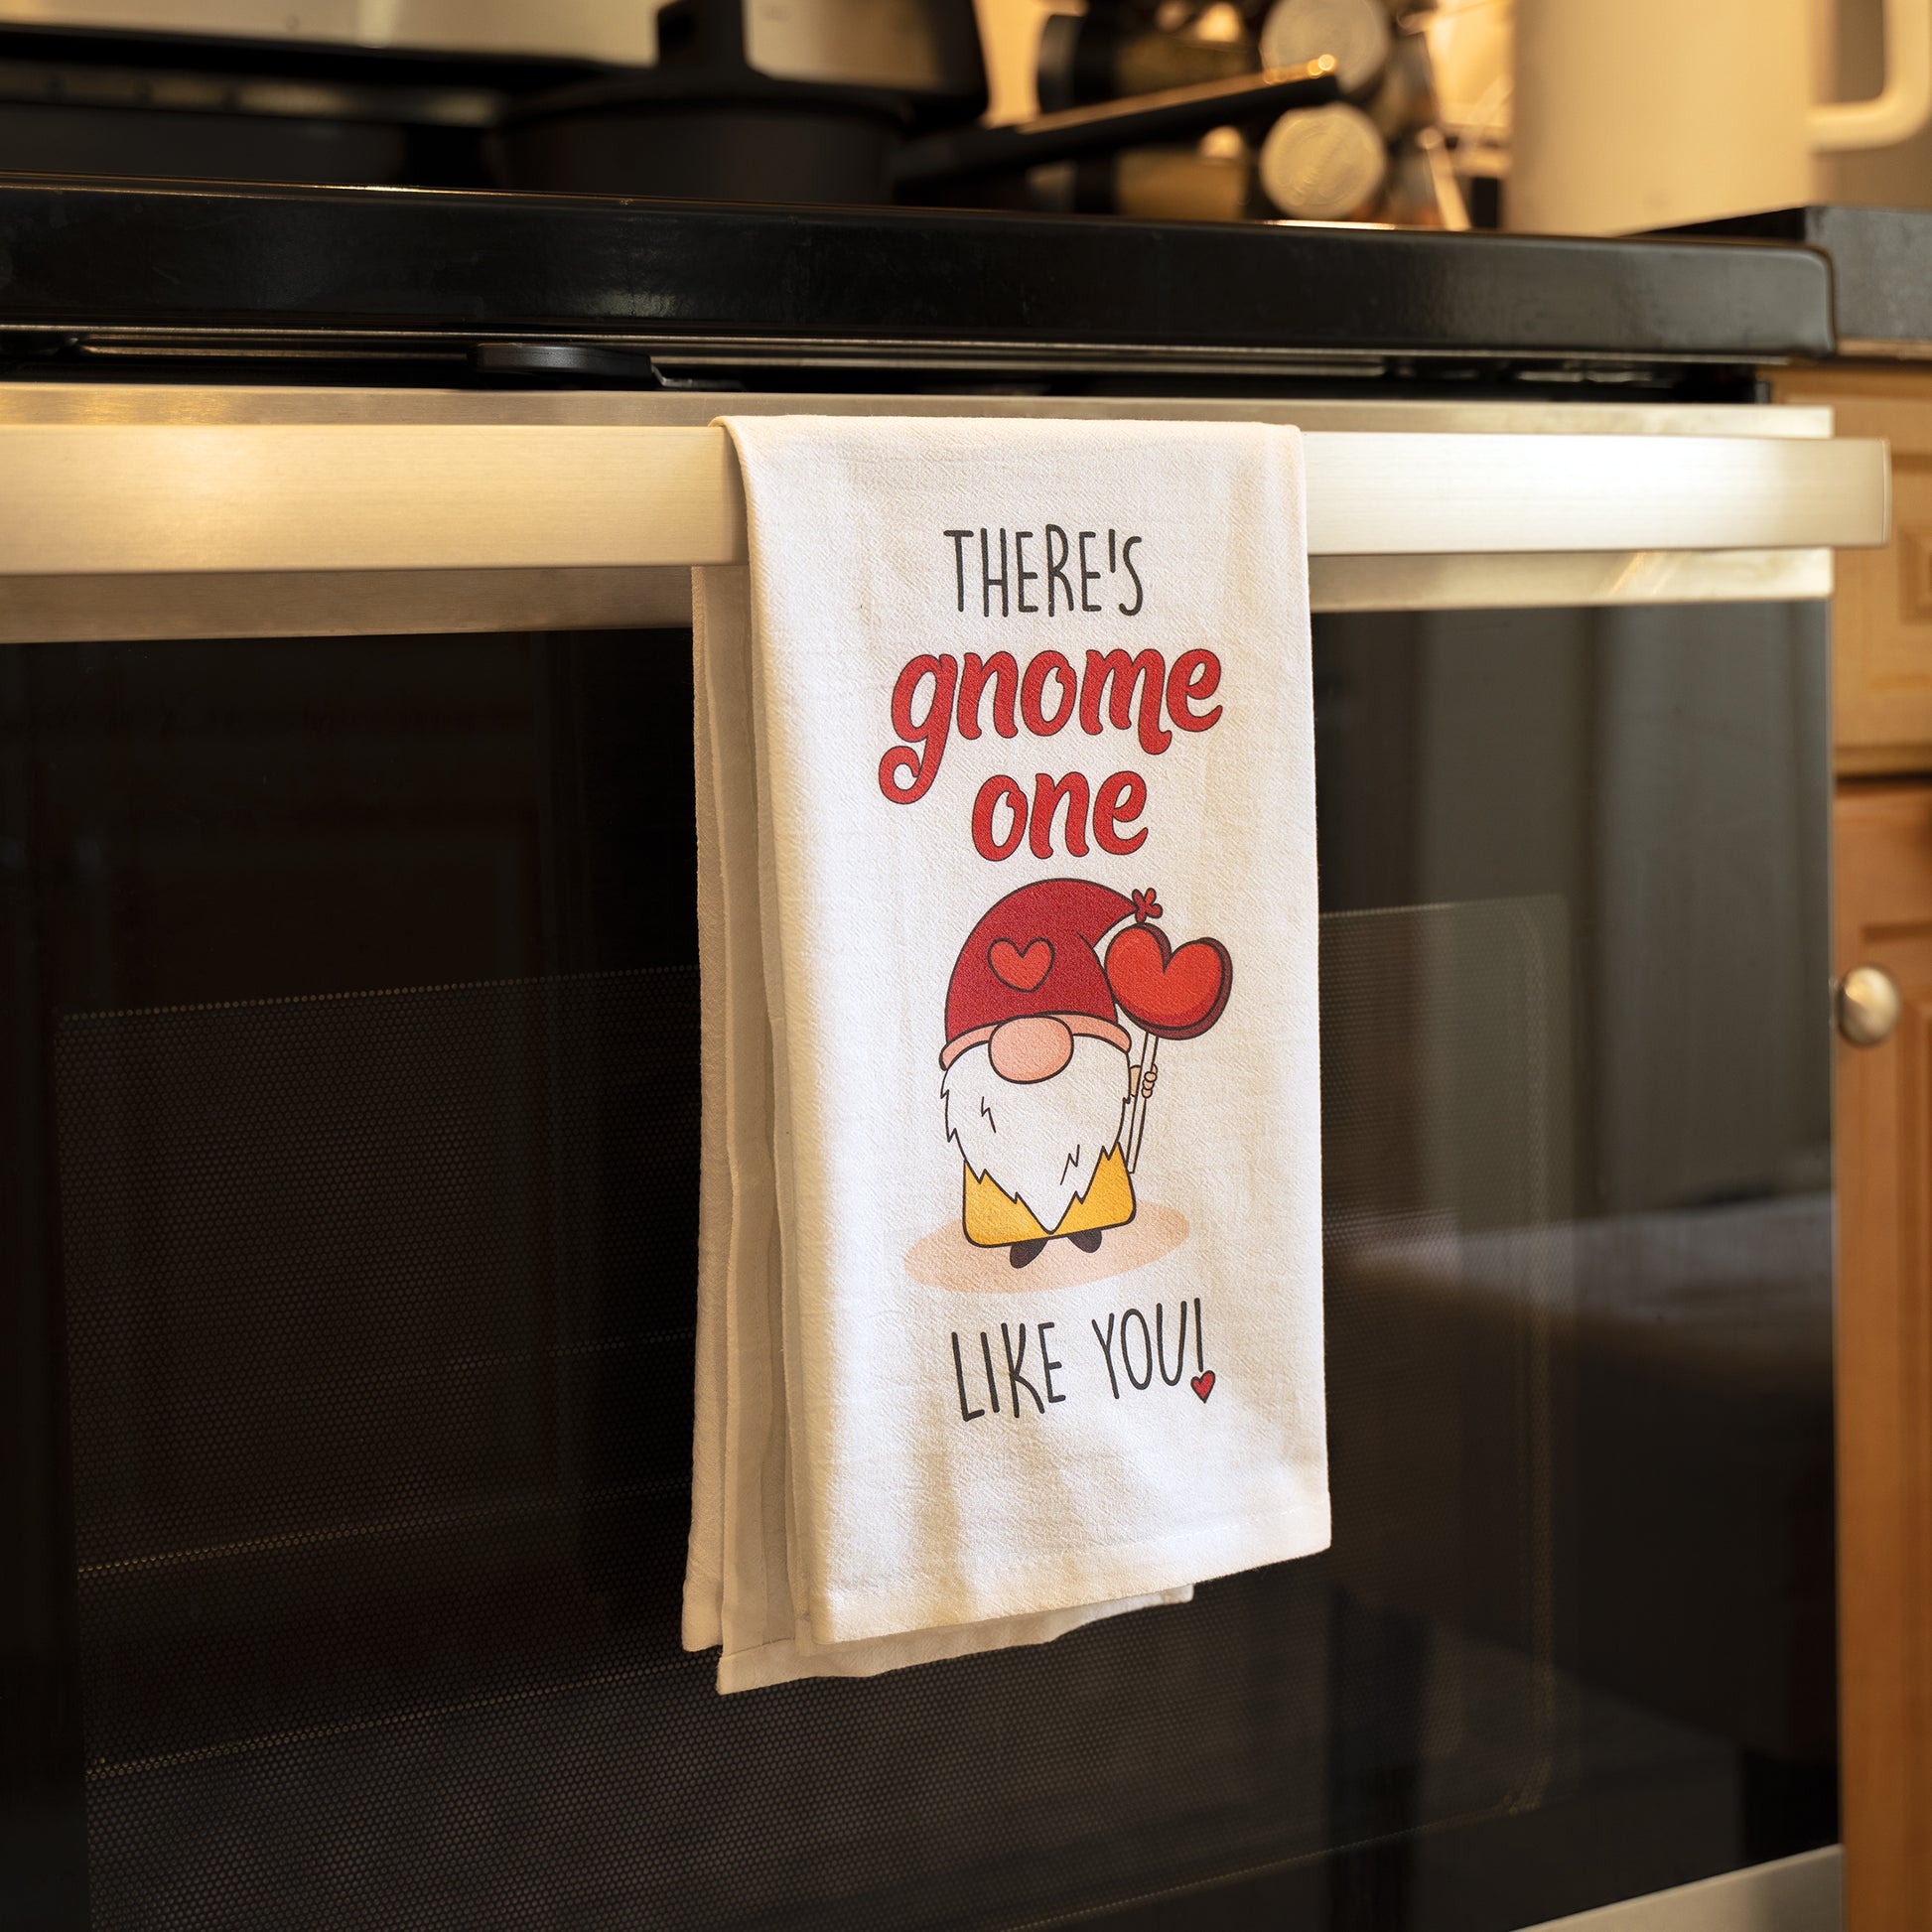 Brighten up your kitchen with these classic blue kitchen towels. These funny  towels are printed on flour sack cloth and are perfect for your Mom and  other Mom friends. Make your Mom's